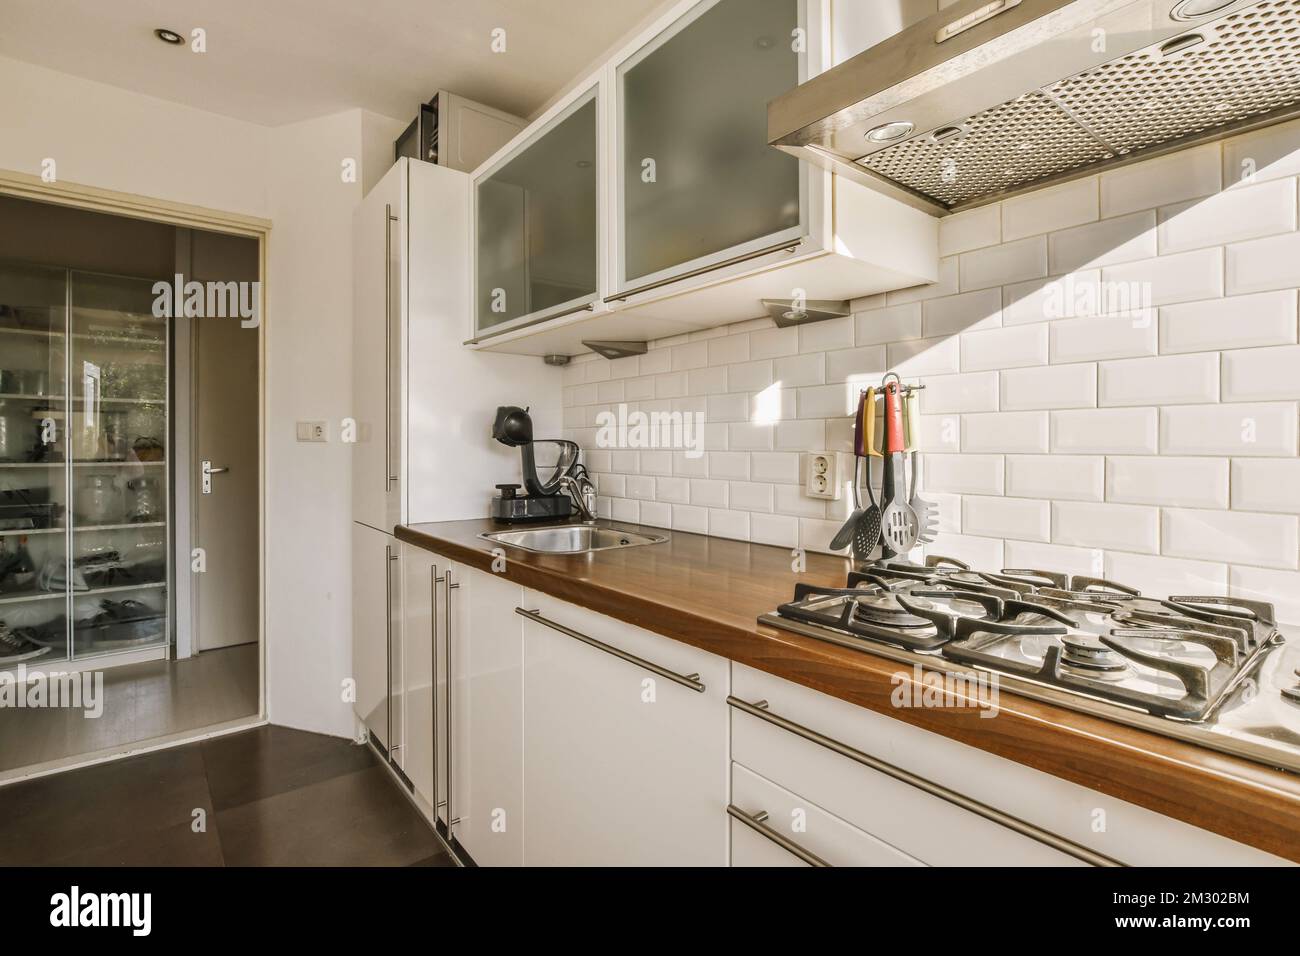 a kitchen with white tiles and wood counter tops on the counters in front of the stove, oven and dishwasher Stock Photo